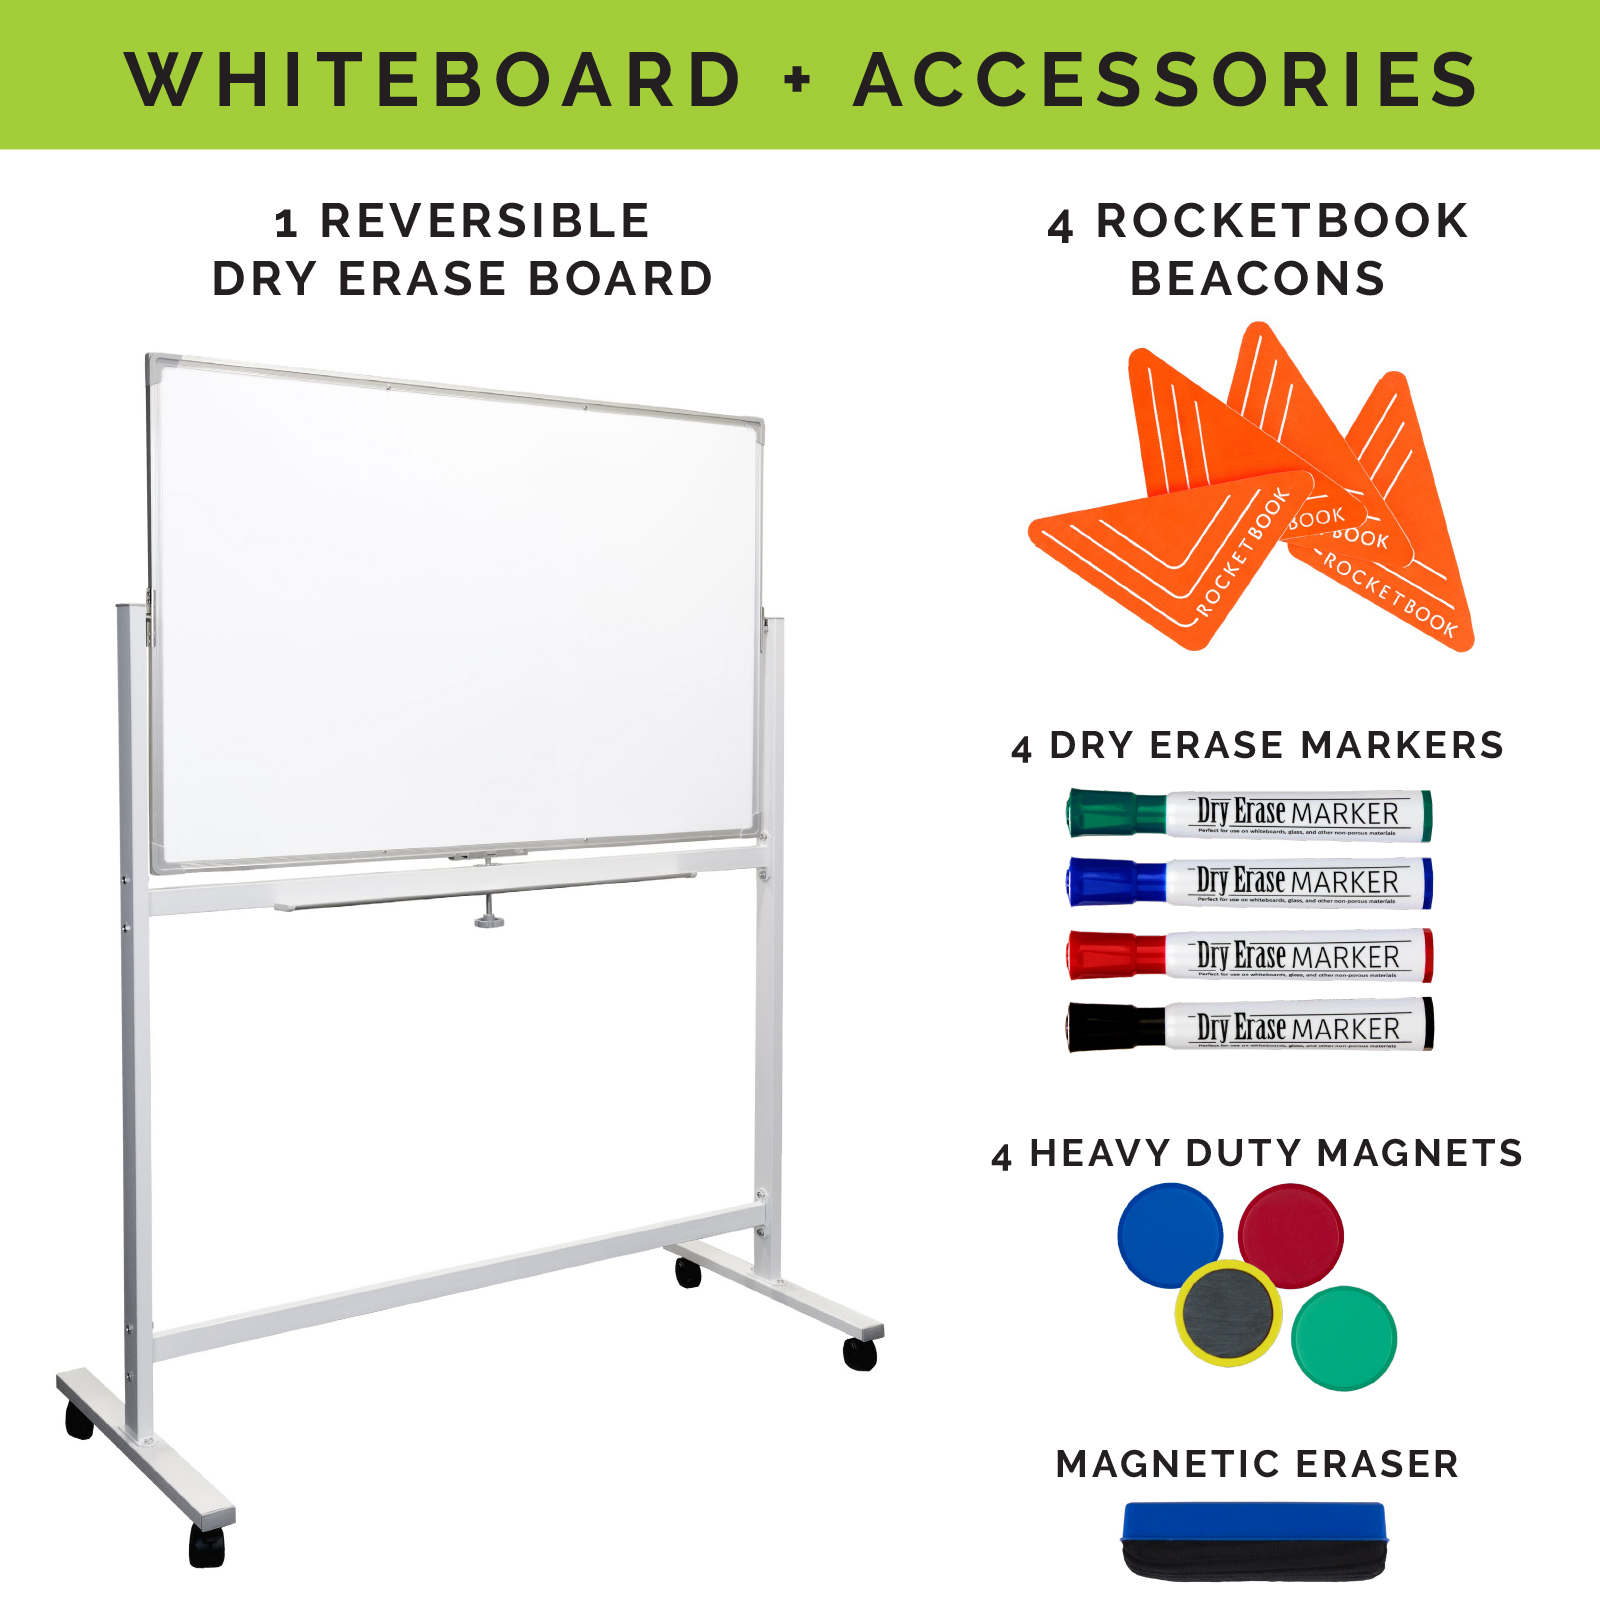 Large 48x32 White Board on Wheels Rolling Stand & 4 Dry Erase Markers